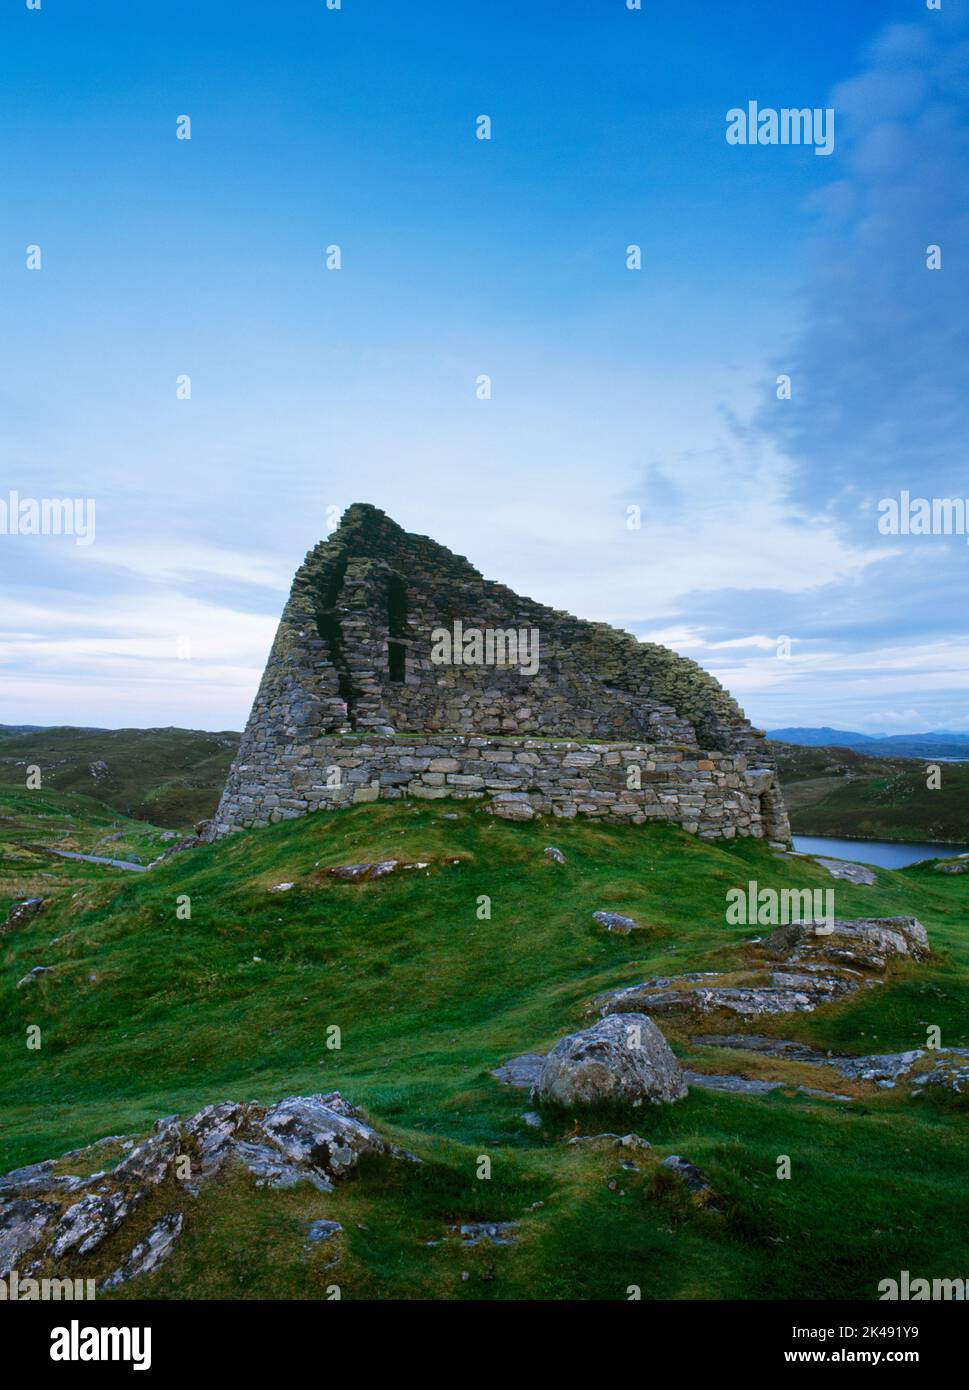 View SSW of Dun Carloway Iron Age broch, Isle of Lewis, Scotland, UK, showing entrance (R) & the inner & outer drystone walls containing a staircase. Stock Photo